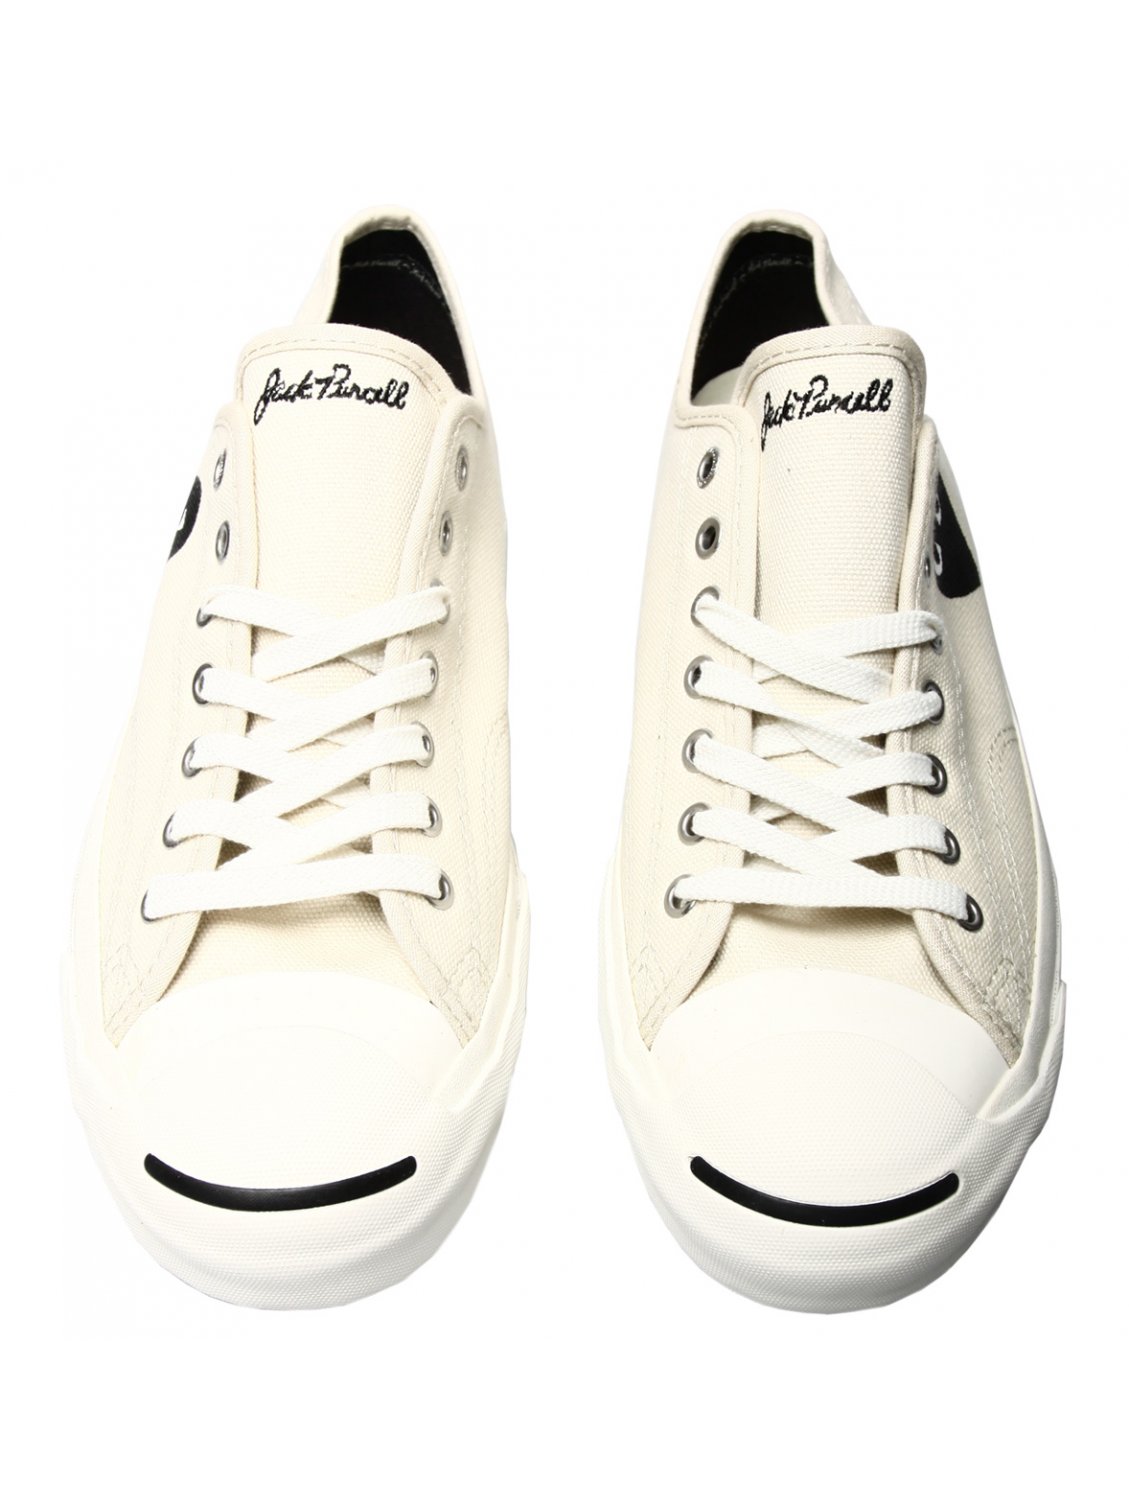 Comme des garçons Play Jack Purcell Converse White with Black Heart in ...